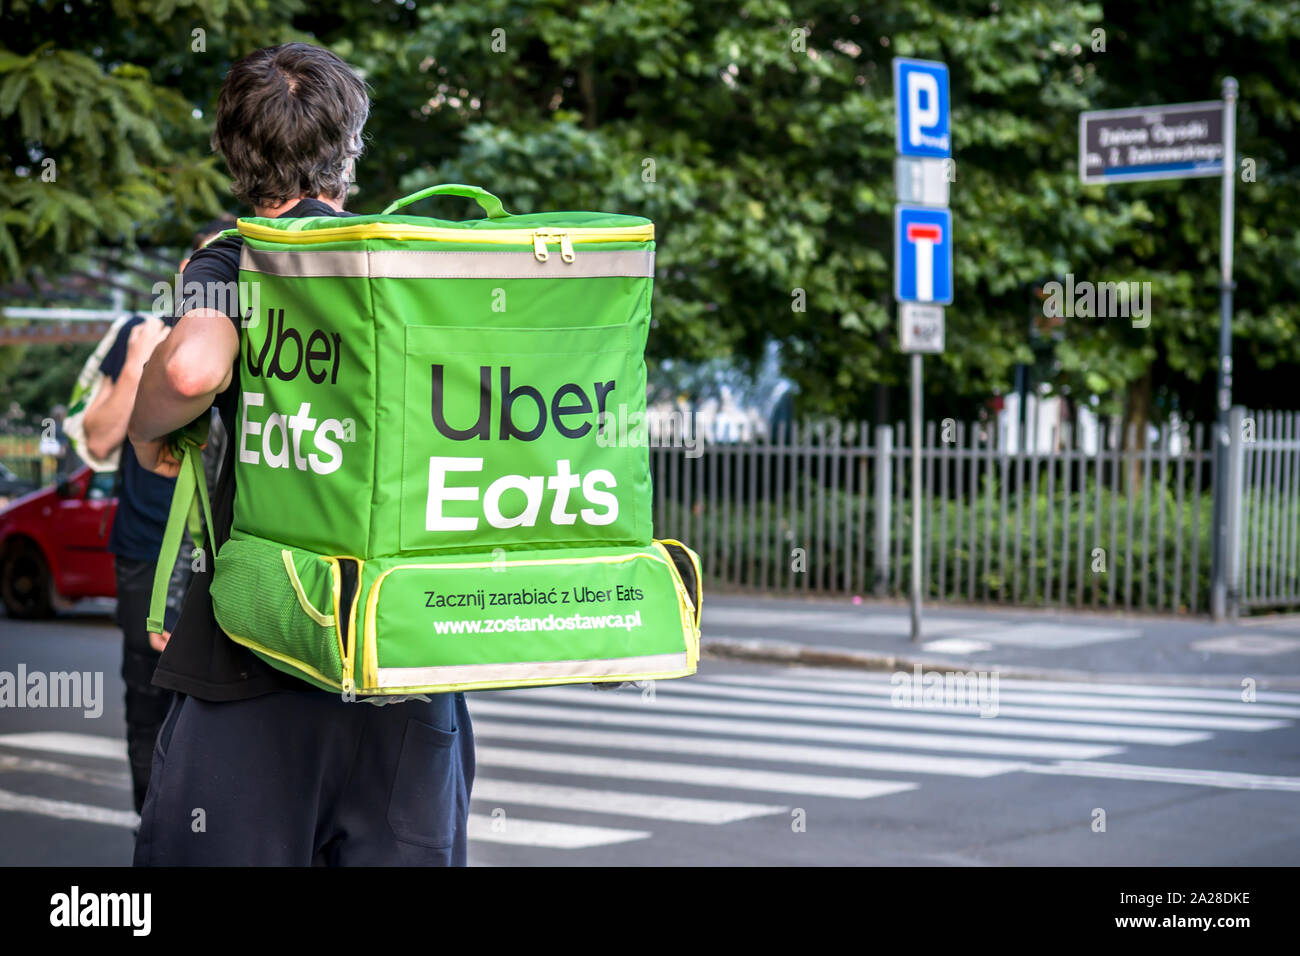 Uber Eats delivery service in town Stock Photo